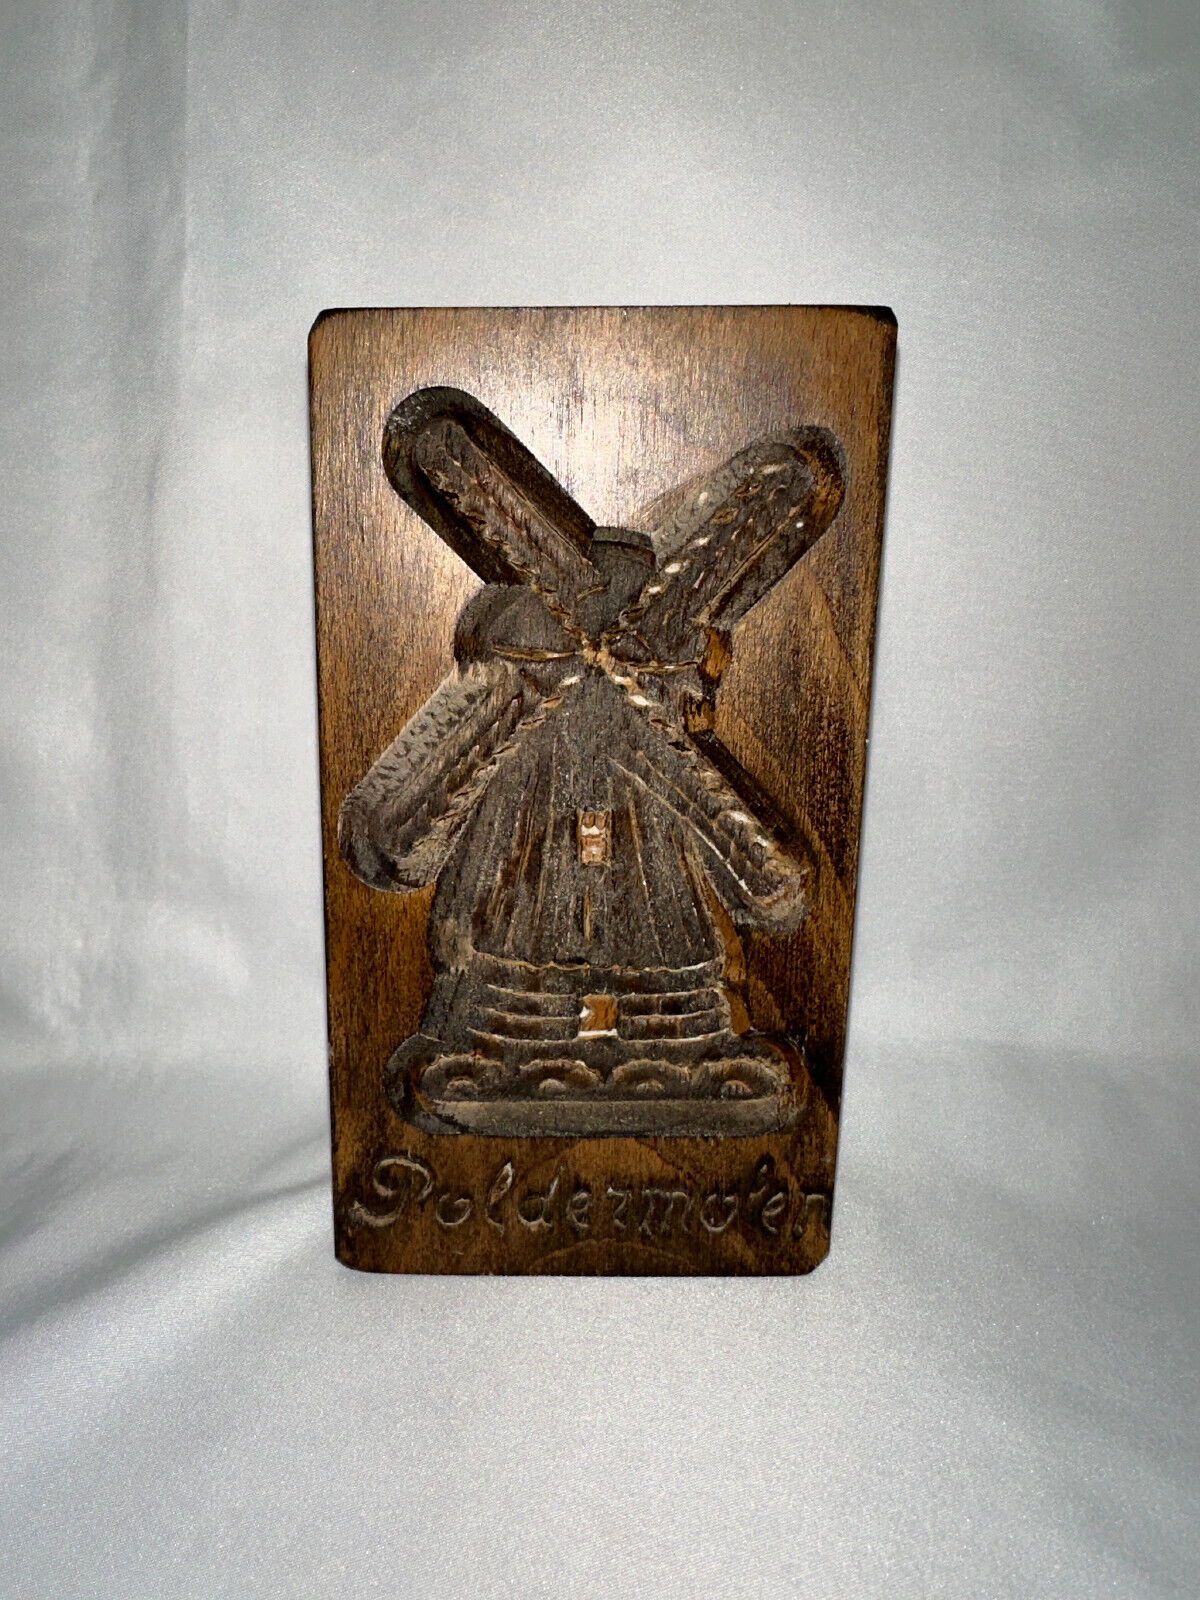 Vintage/Antique Carved Wood Poldermolen Windmill Cookie Mold Speculaas Speculoos